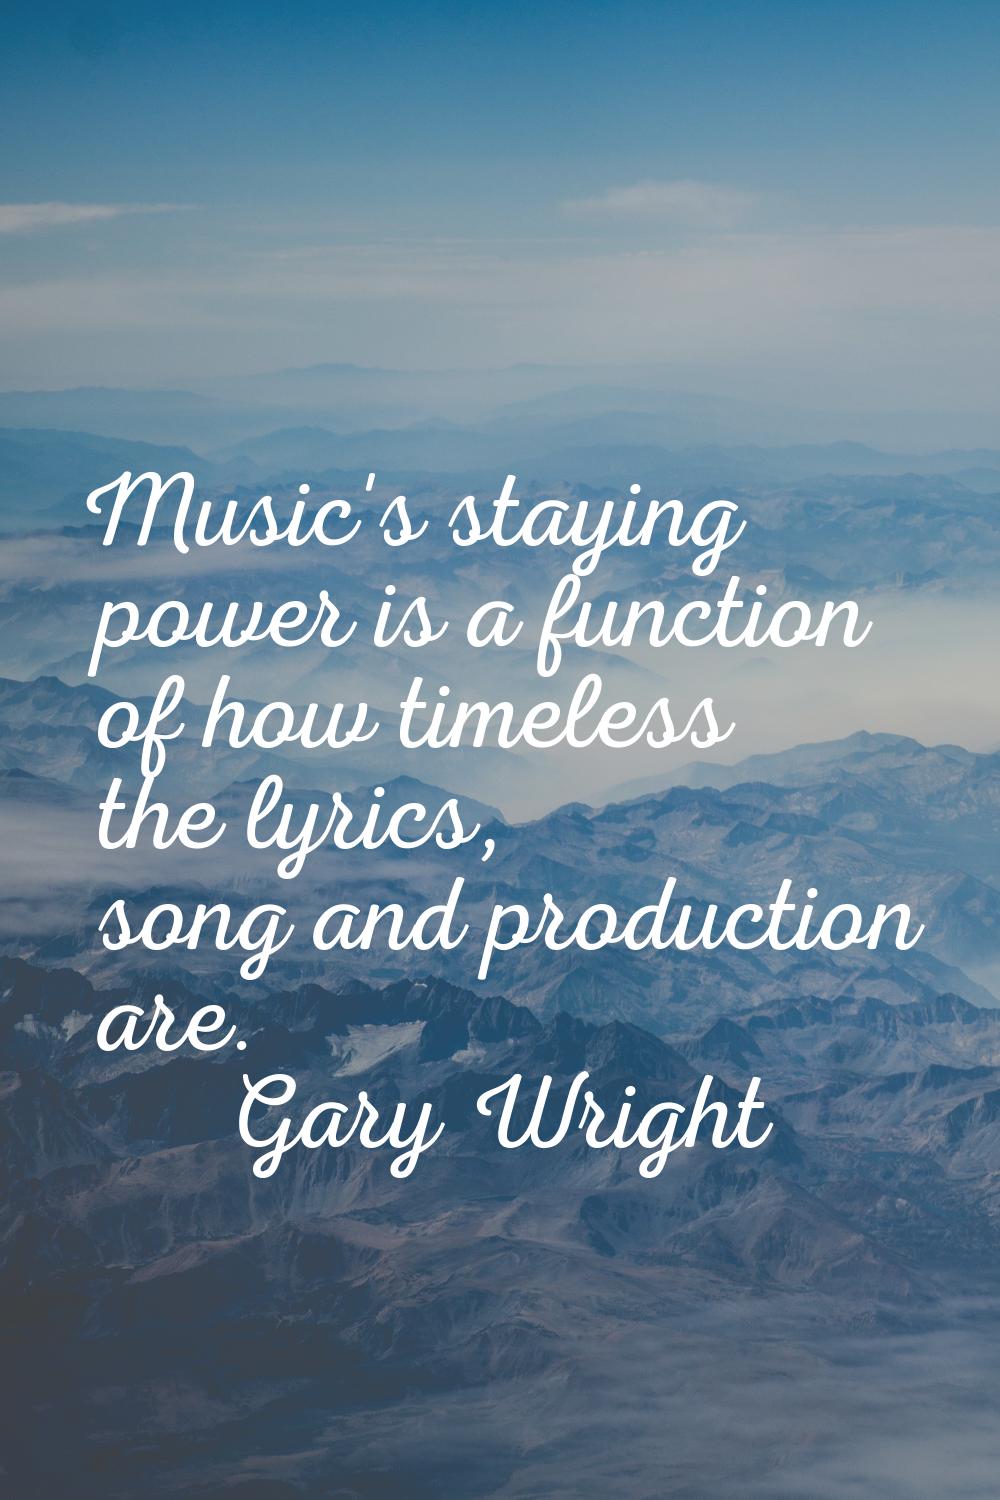 Music's staying power is a function of how timeless the lyrics, song and production are.